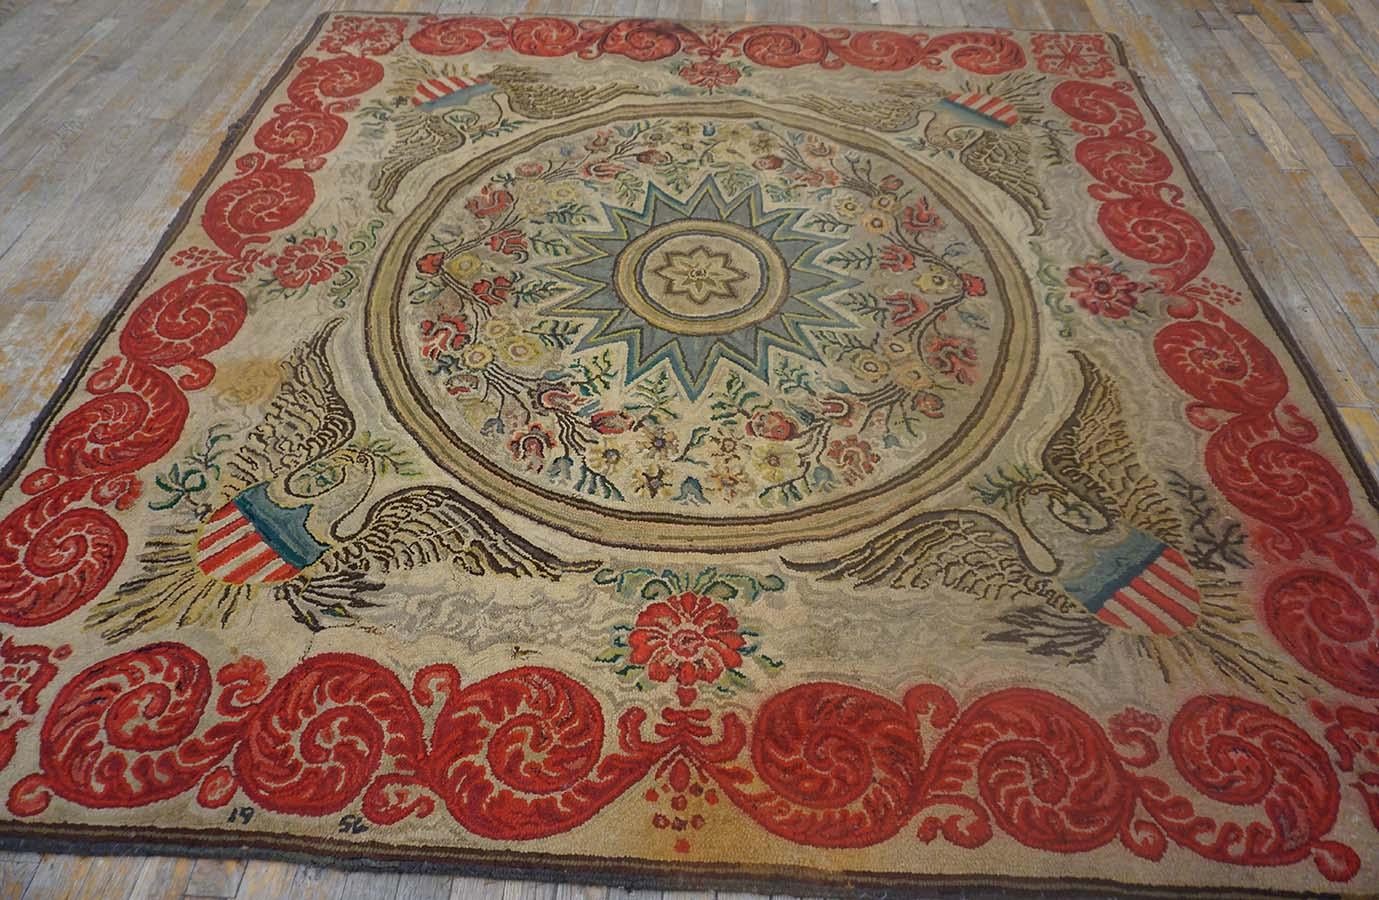 Hand-Woven Early 20th Century  American Hooked Rug ( 6' 8'' x 6' 8'' - 203 x 203 ) For Sale